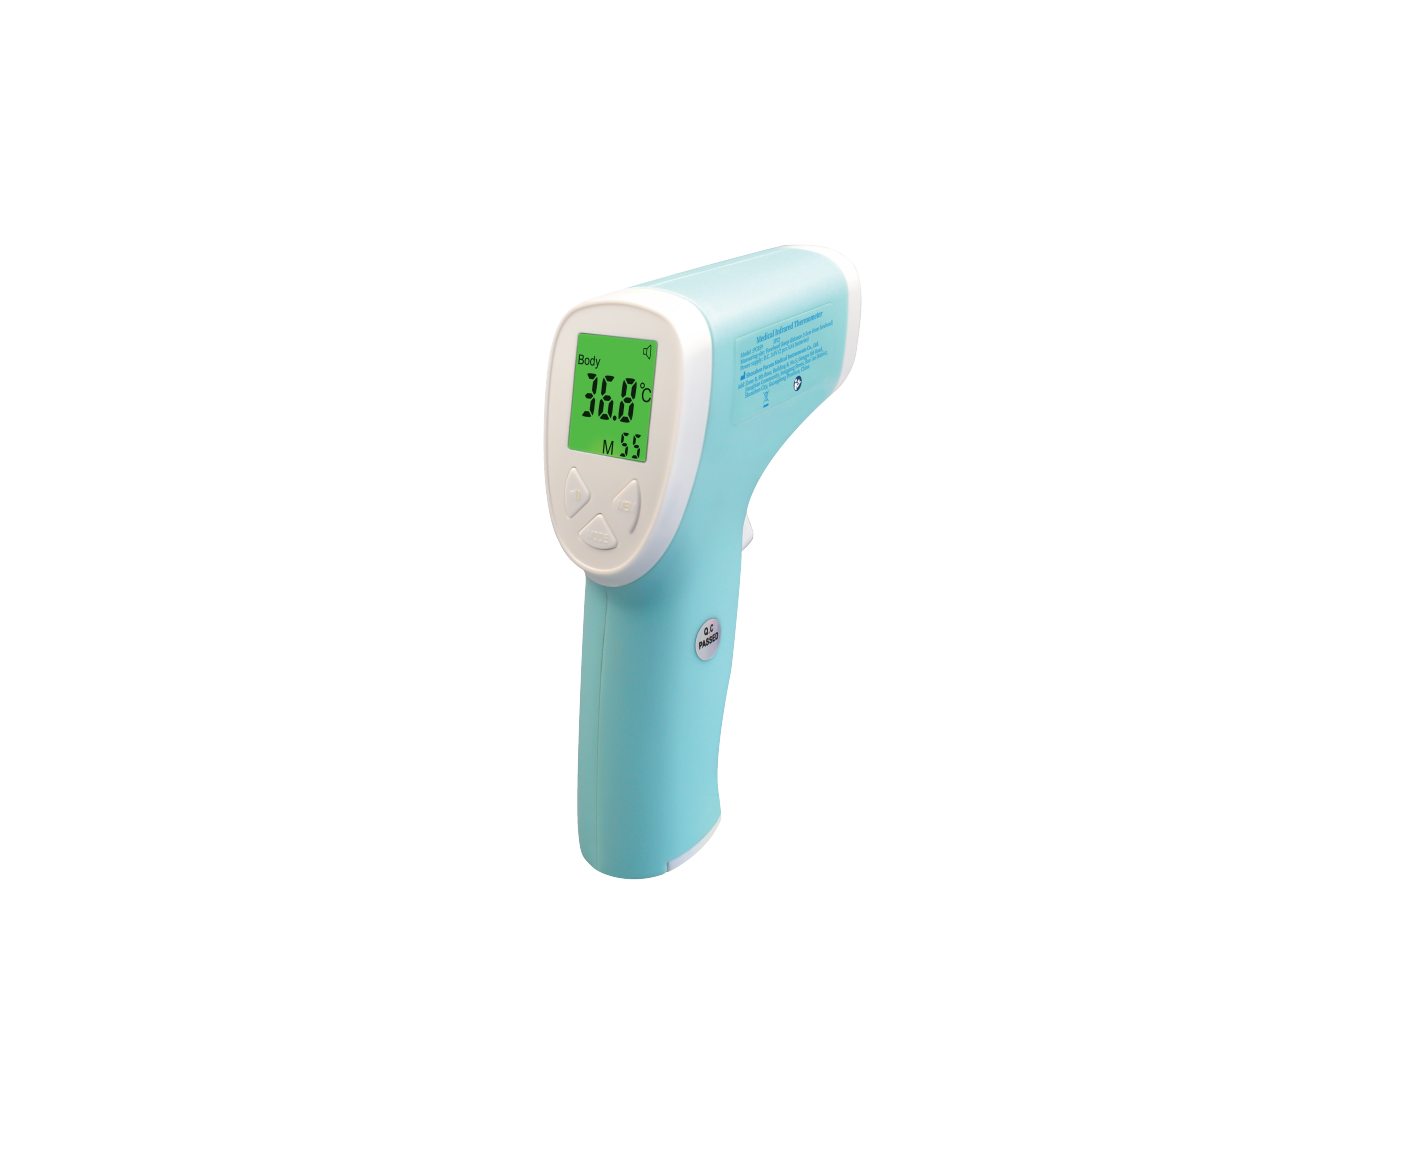 Nex Inno Tech PC859 Medical Infrared Thermometer User Manual